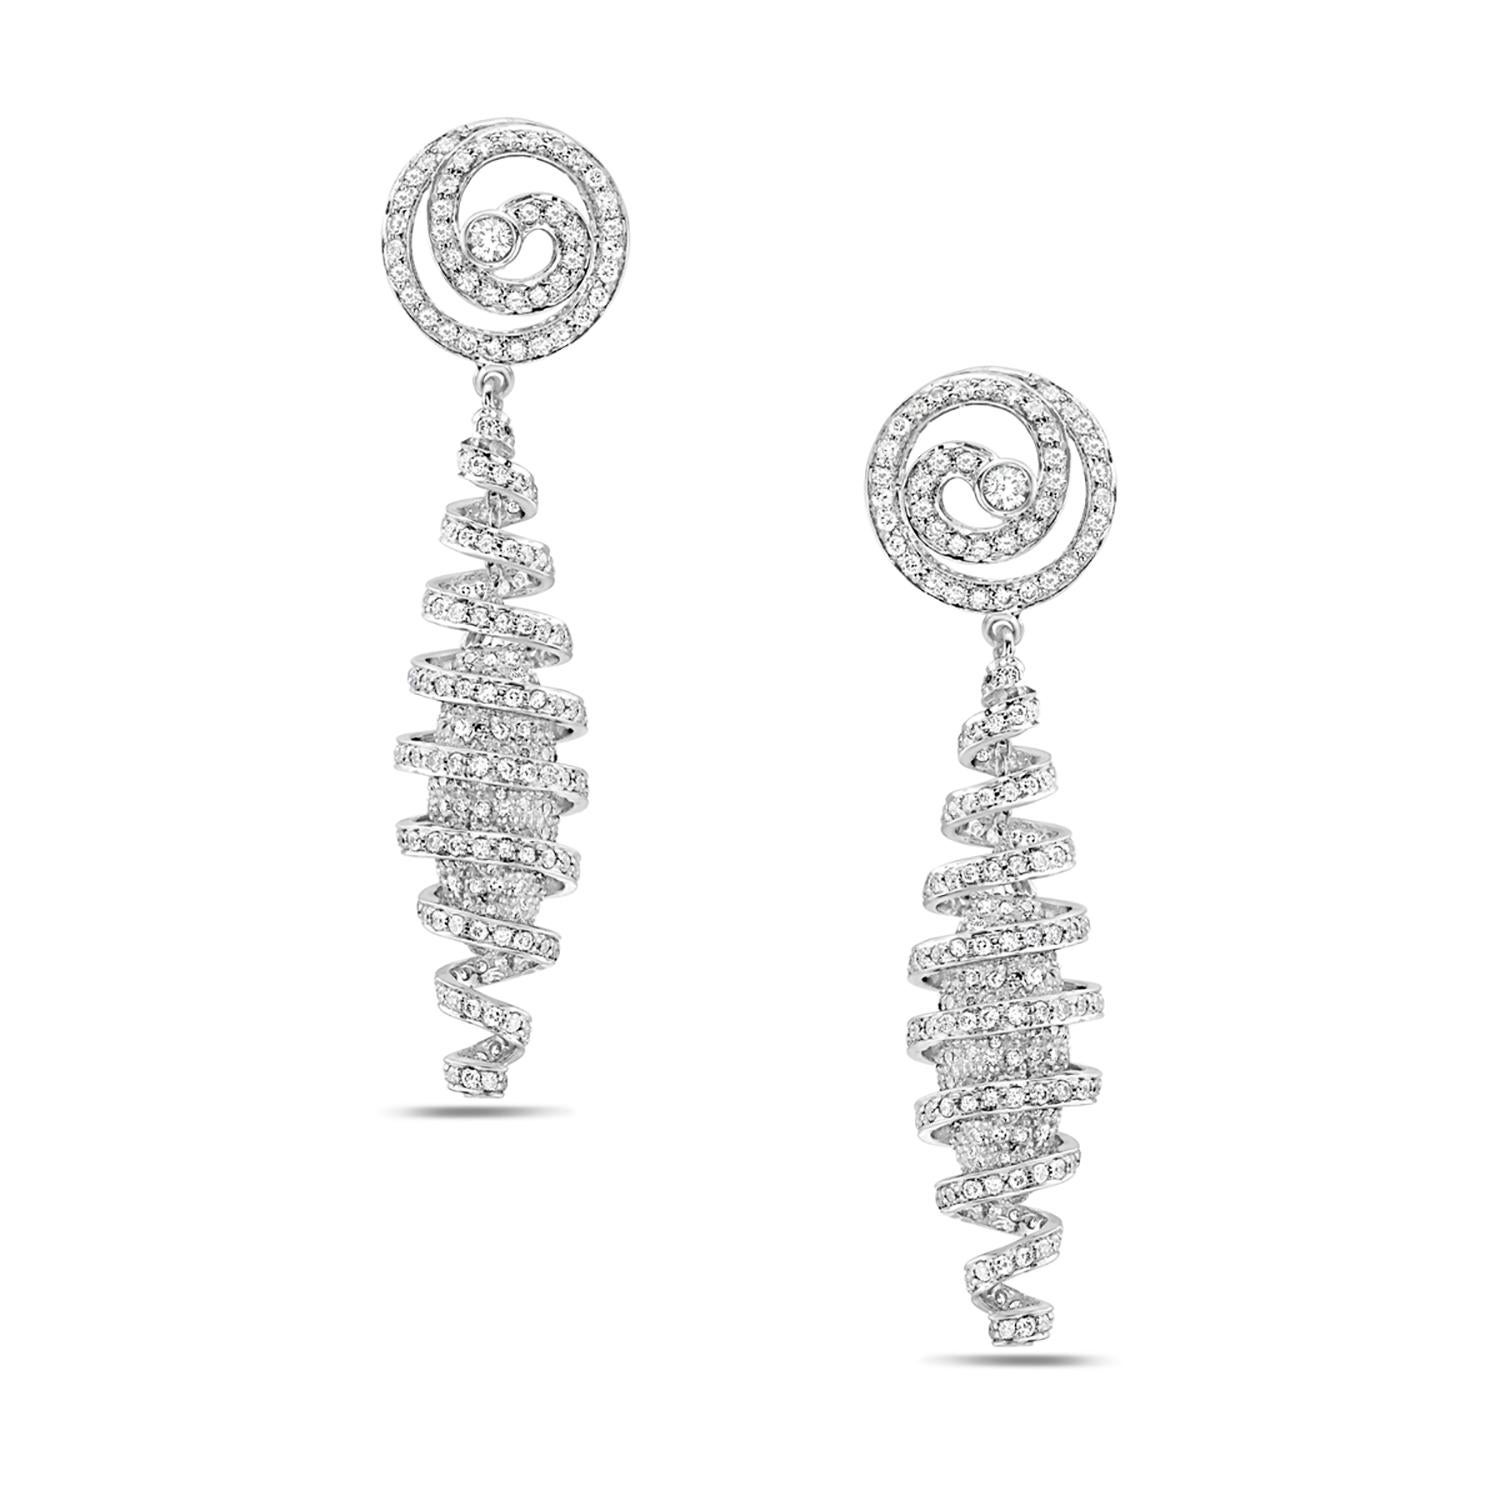 Spiral Shaped Earrings with Pave Halo Diamonds Made in 18k White Gold In New Condition For Sale In New York, NY